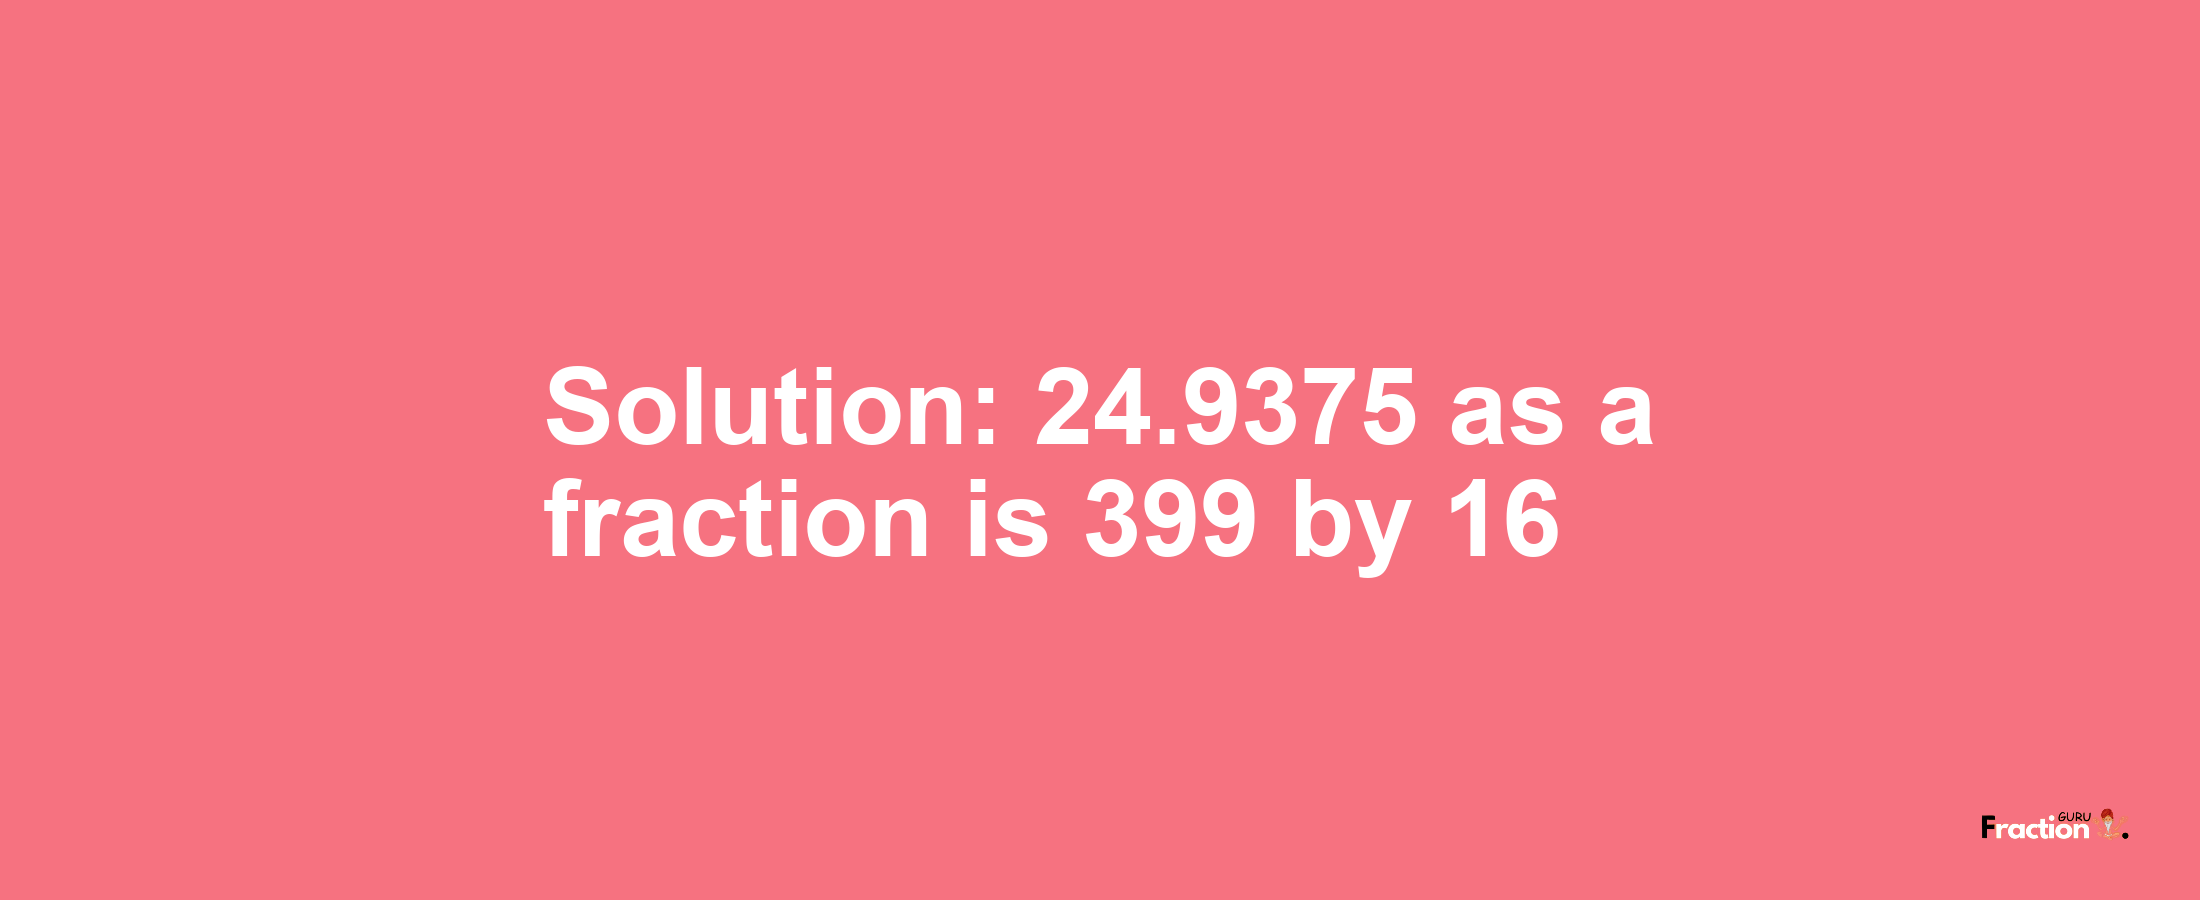 Solution:24.9375 as a fraction is 399/16